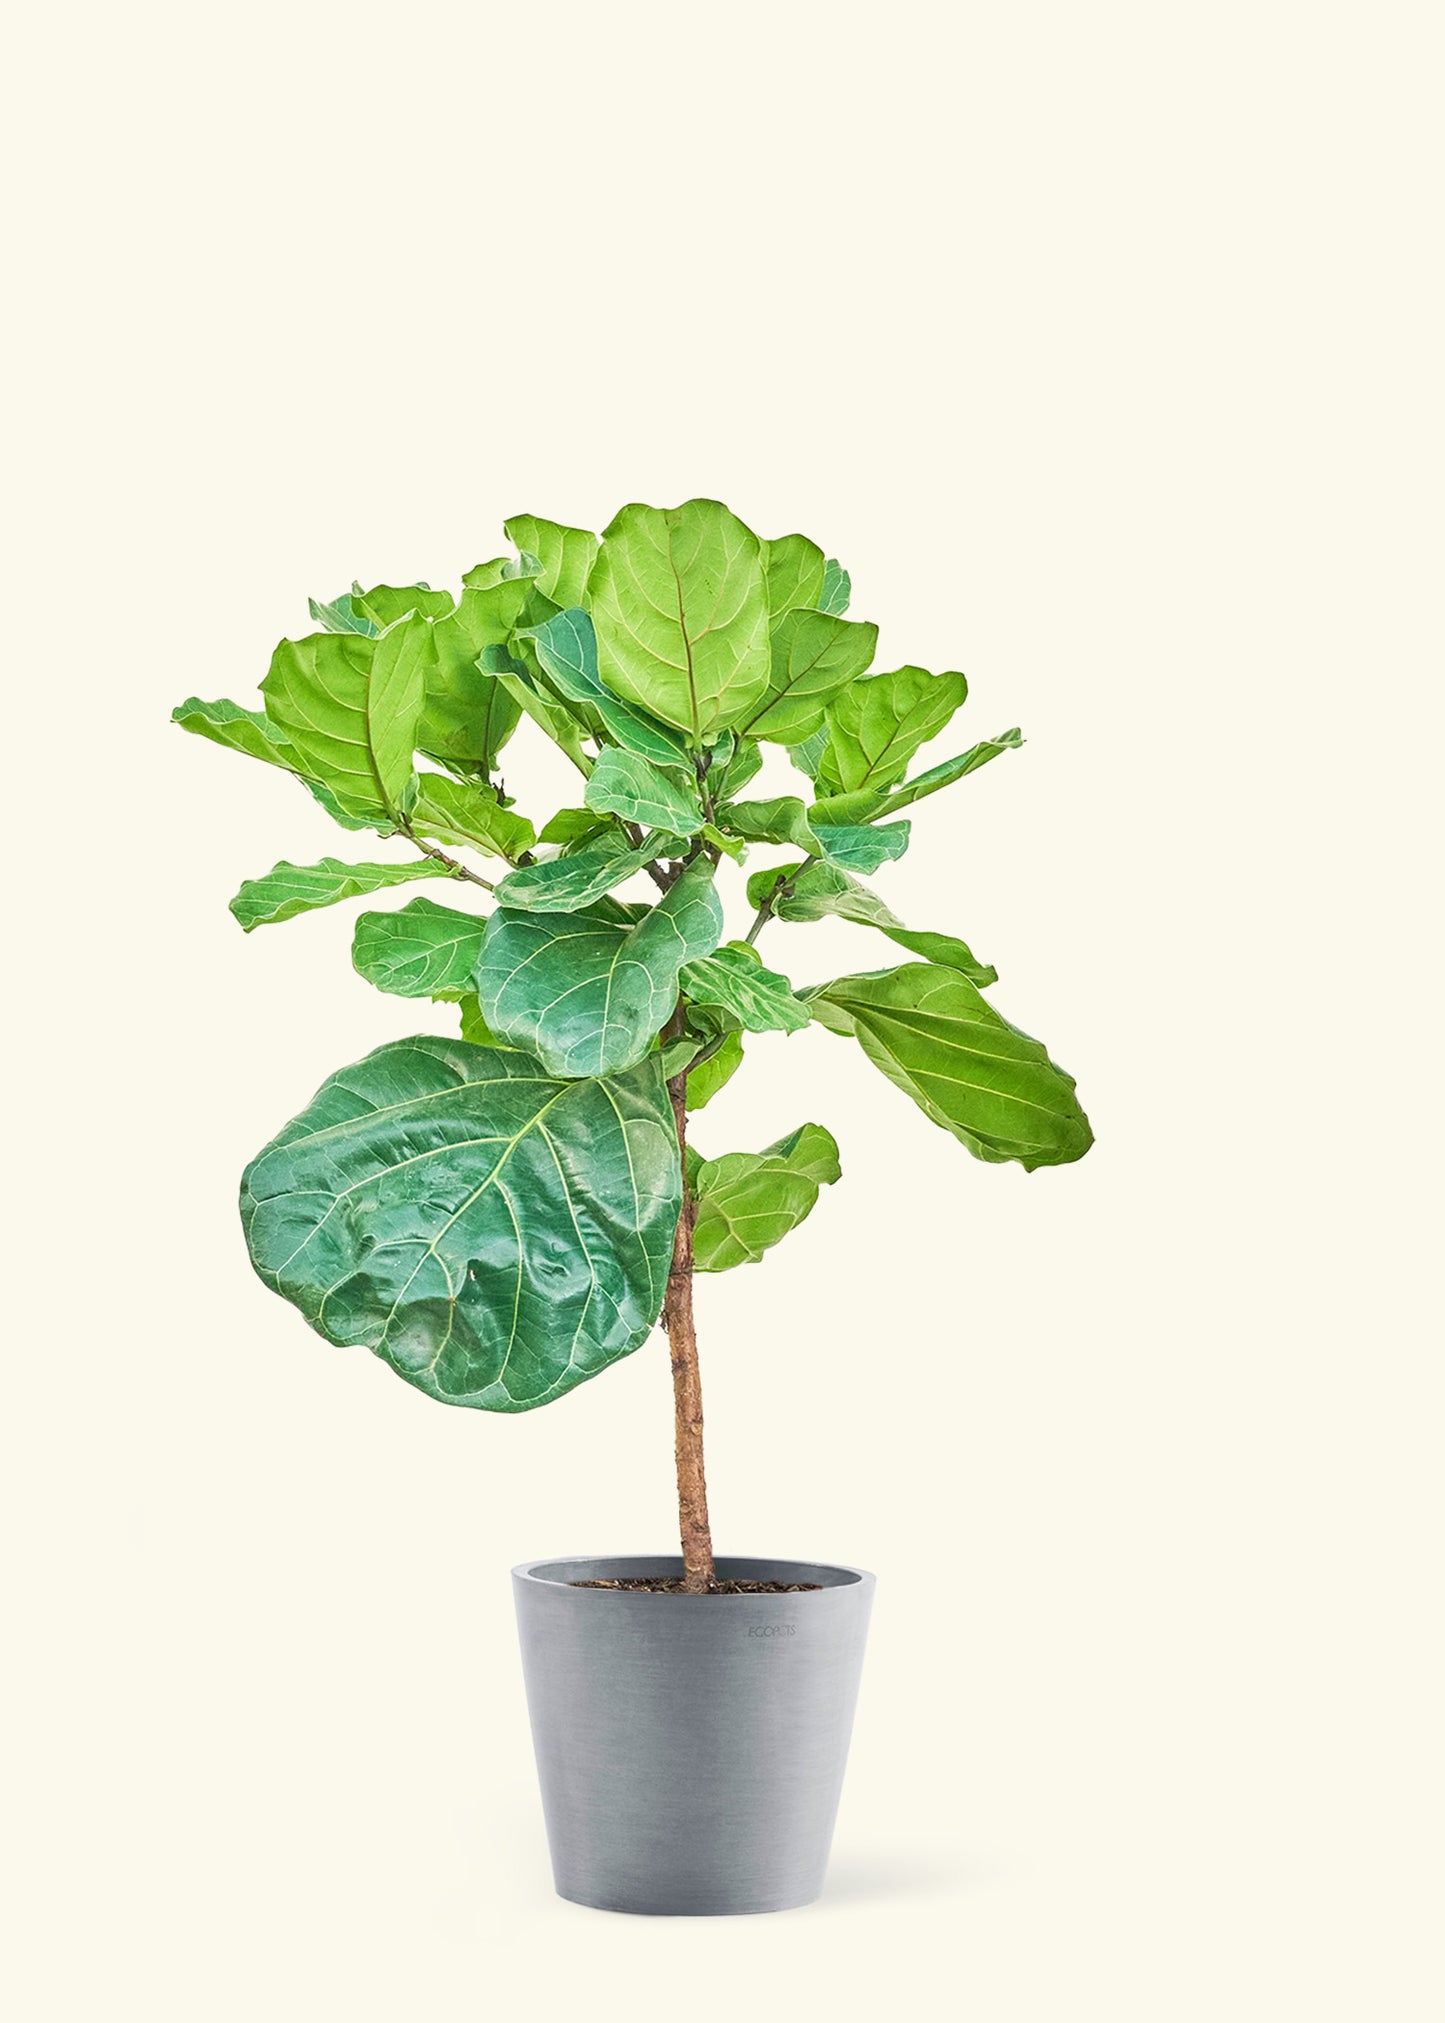 Large Fiddle Leaf Fig Plant in a gray stone pot.